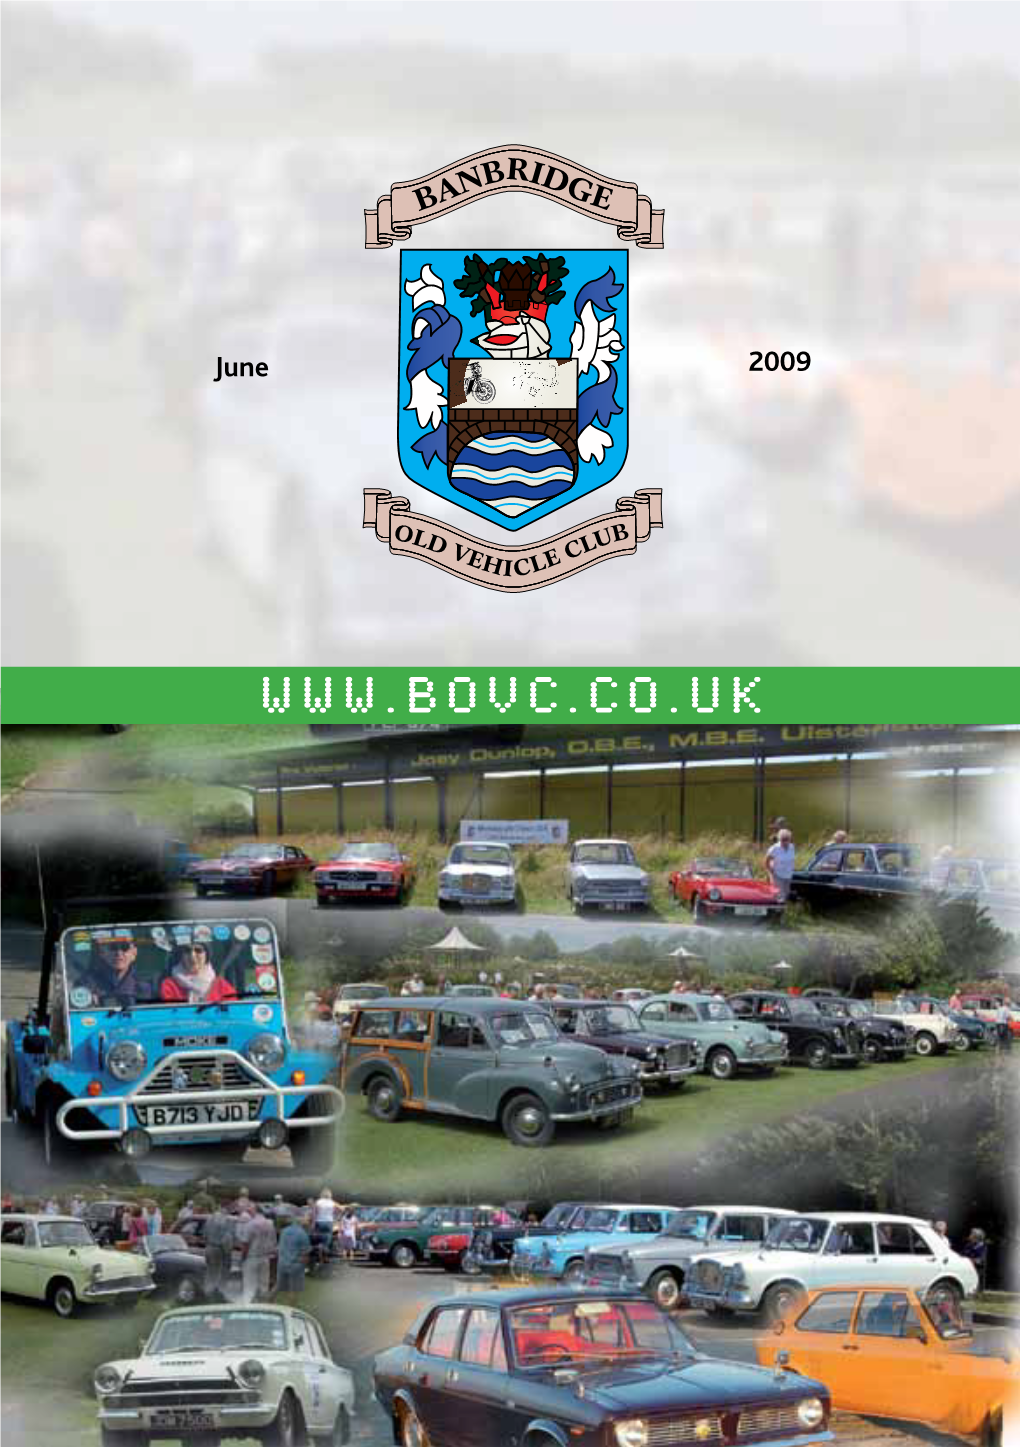 Banbridge Old Vehicle Club Limited Takes Every Care As to the Accuracy of Materials Printed in This Magazine, It Cannot Accept Any Liability in Respect of the Same